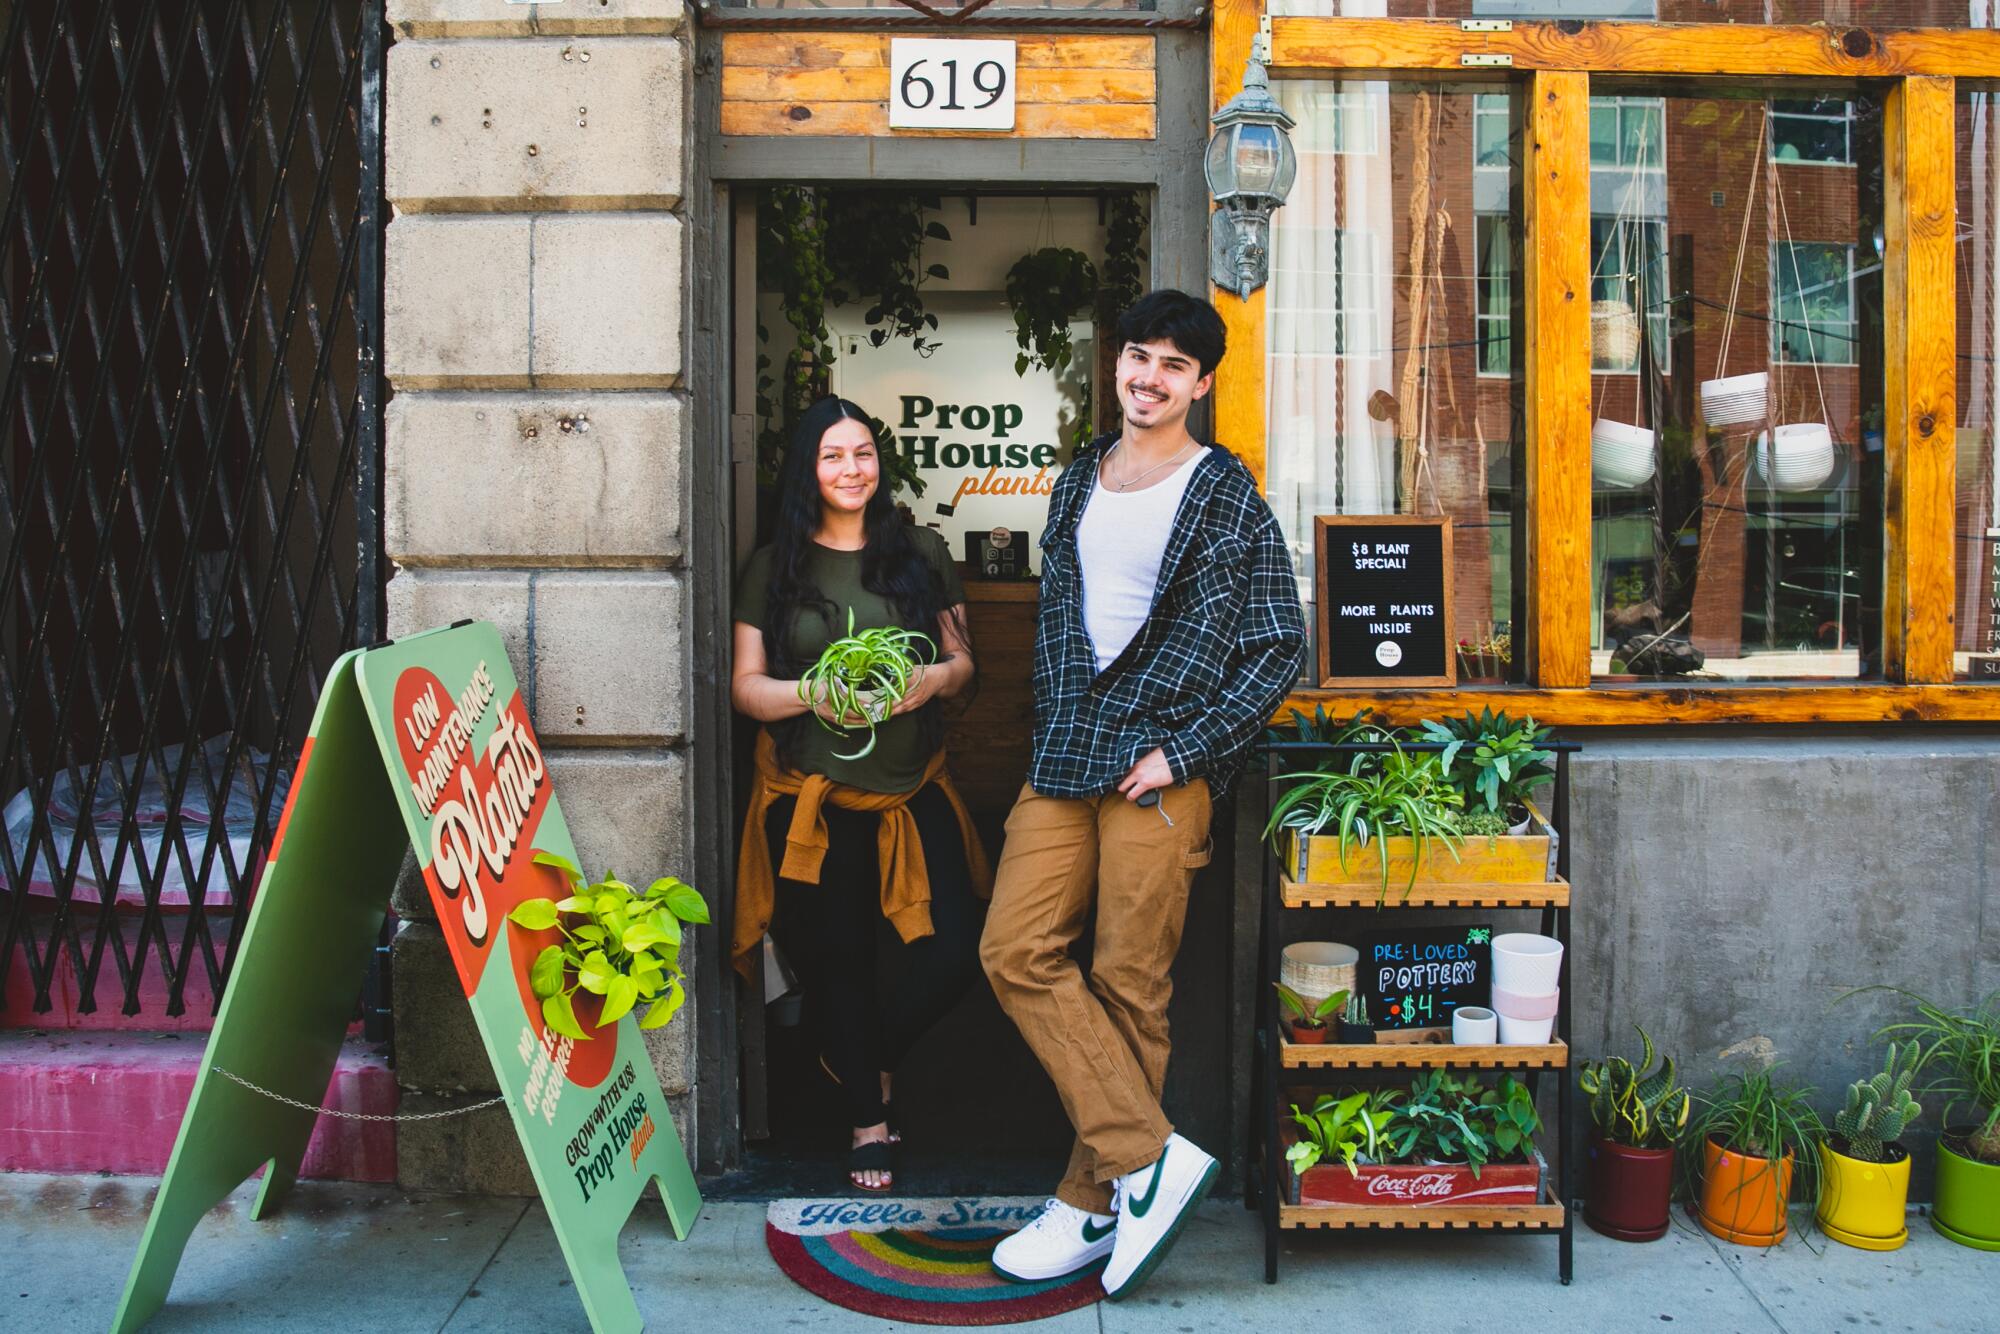 A young woman and a young man smile outside a door that reads "Prop House Plants."